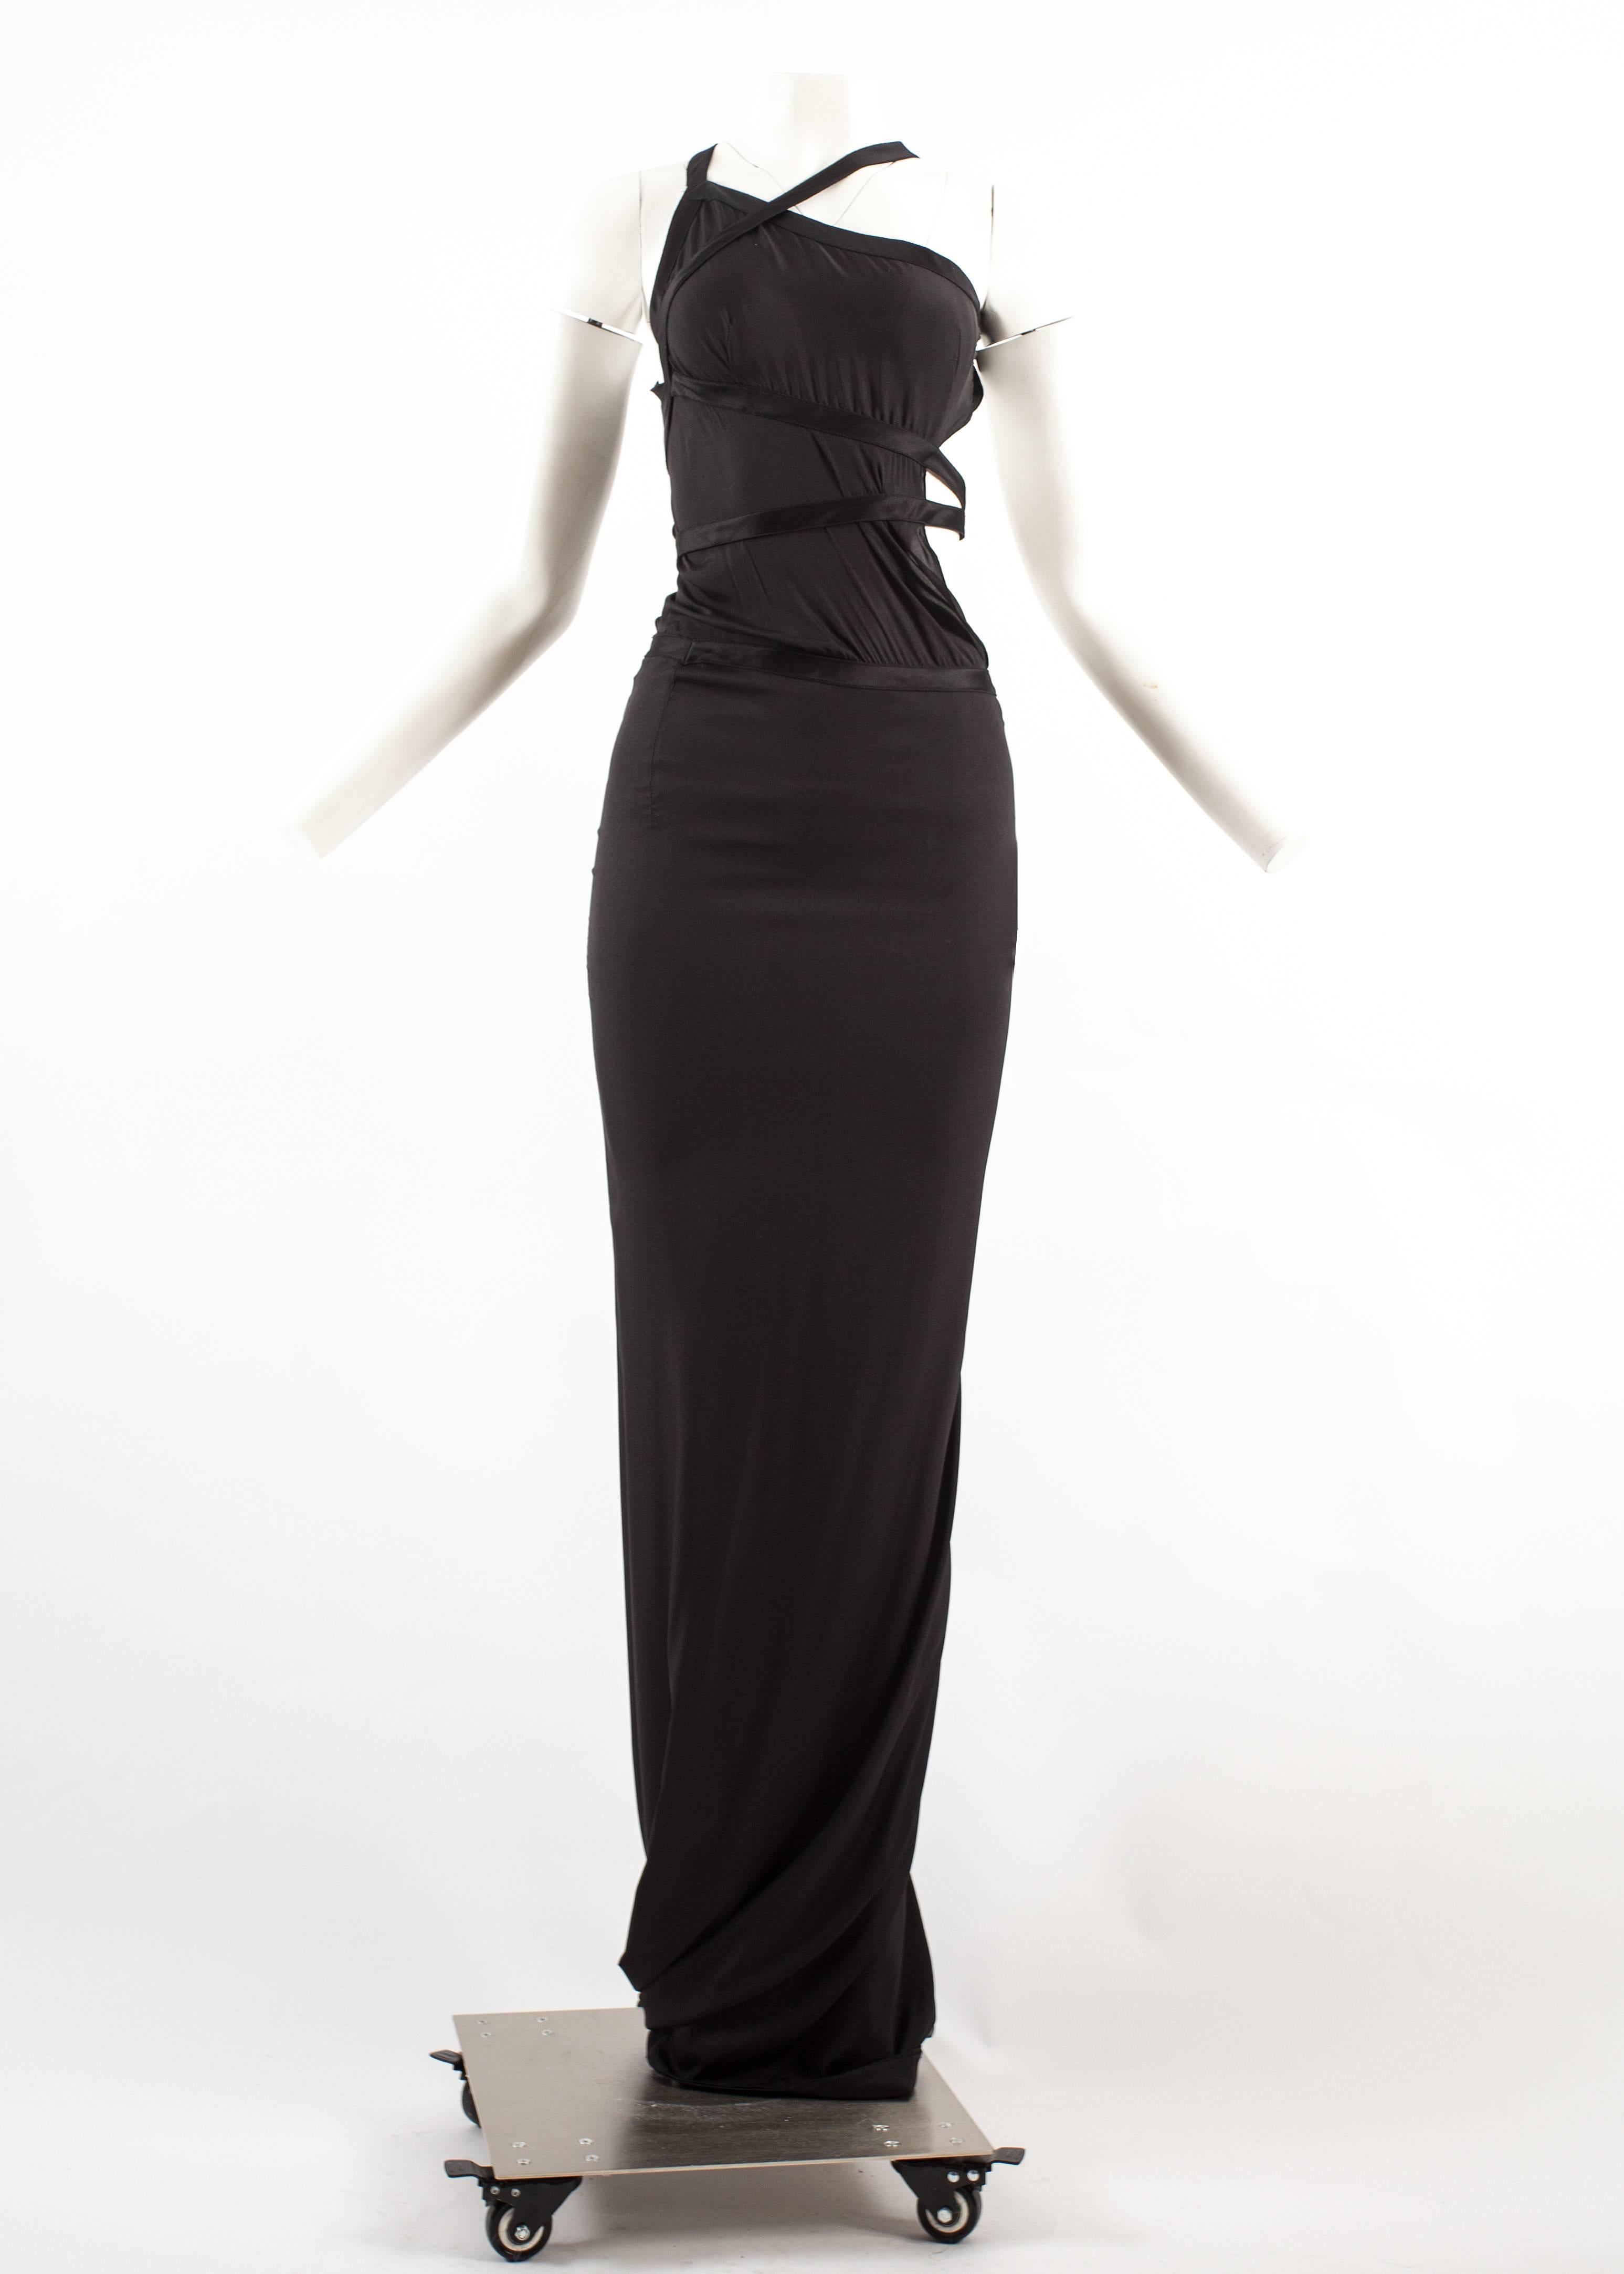 Tom Ford for Gucci Autumn-Winter 2003 black silk bondage evening dress

- Open back
- Asymmetric bondage straps around bust and waist
- Zip closure on lower hip
- Silk and spandex